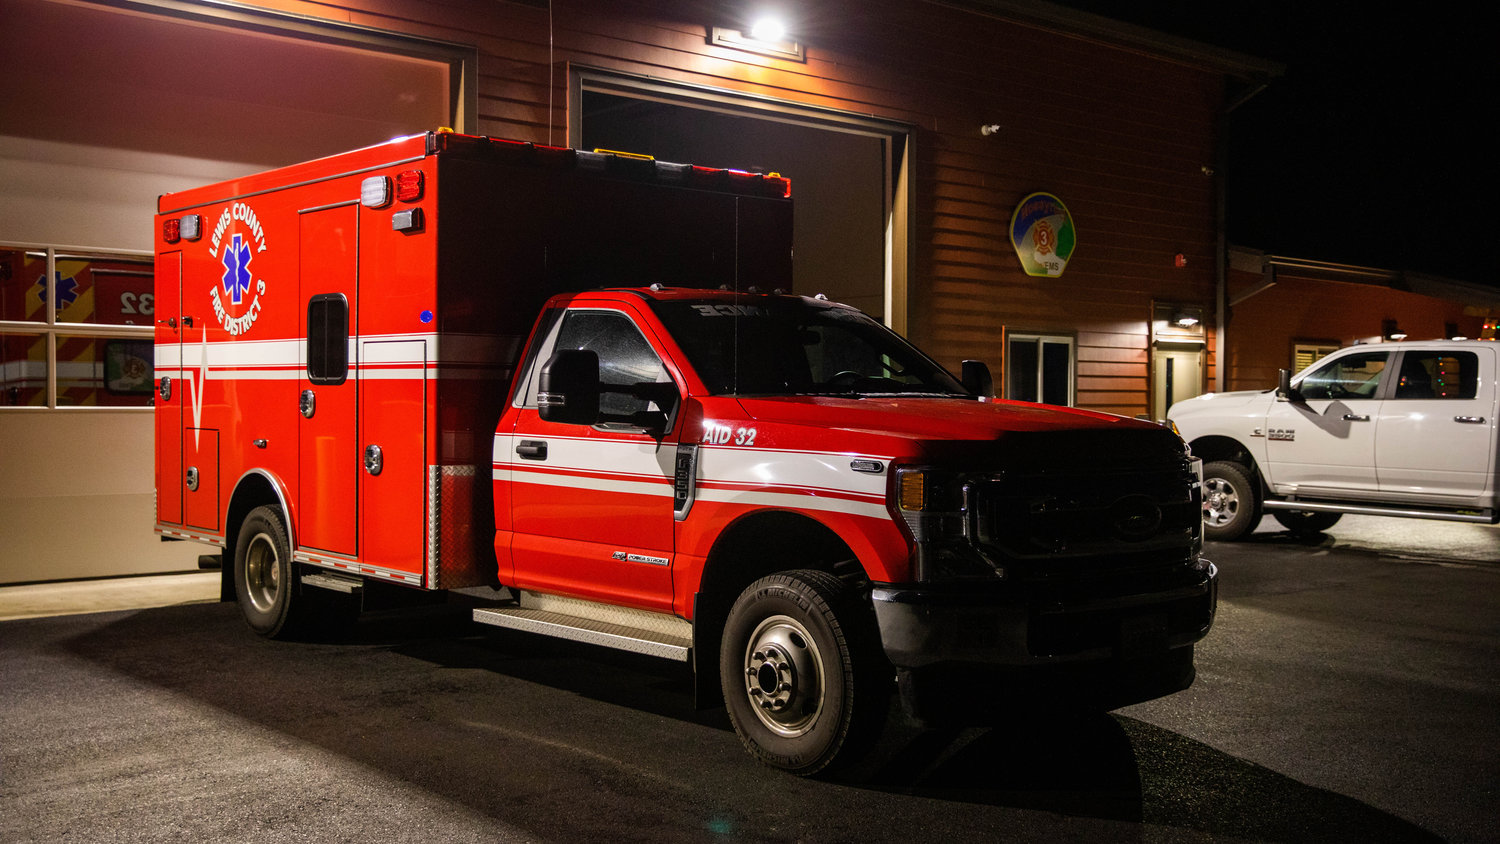 A new ambulance sits on display Monday night outside the Lewis County Fire District 3 building in Mossyrock.